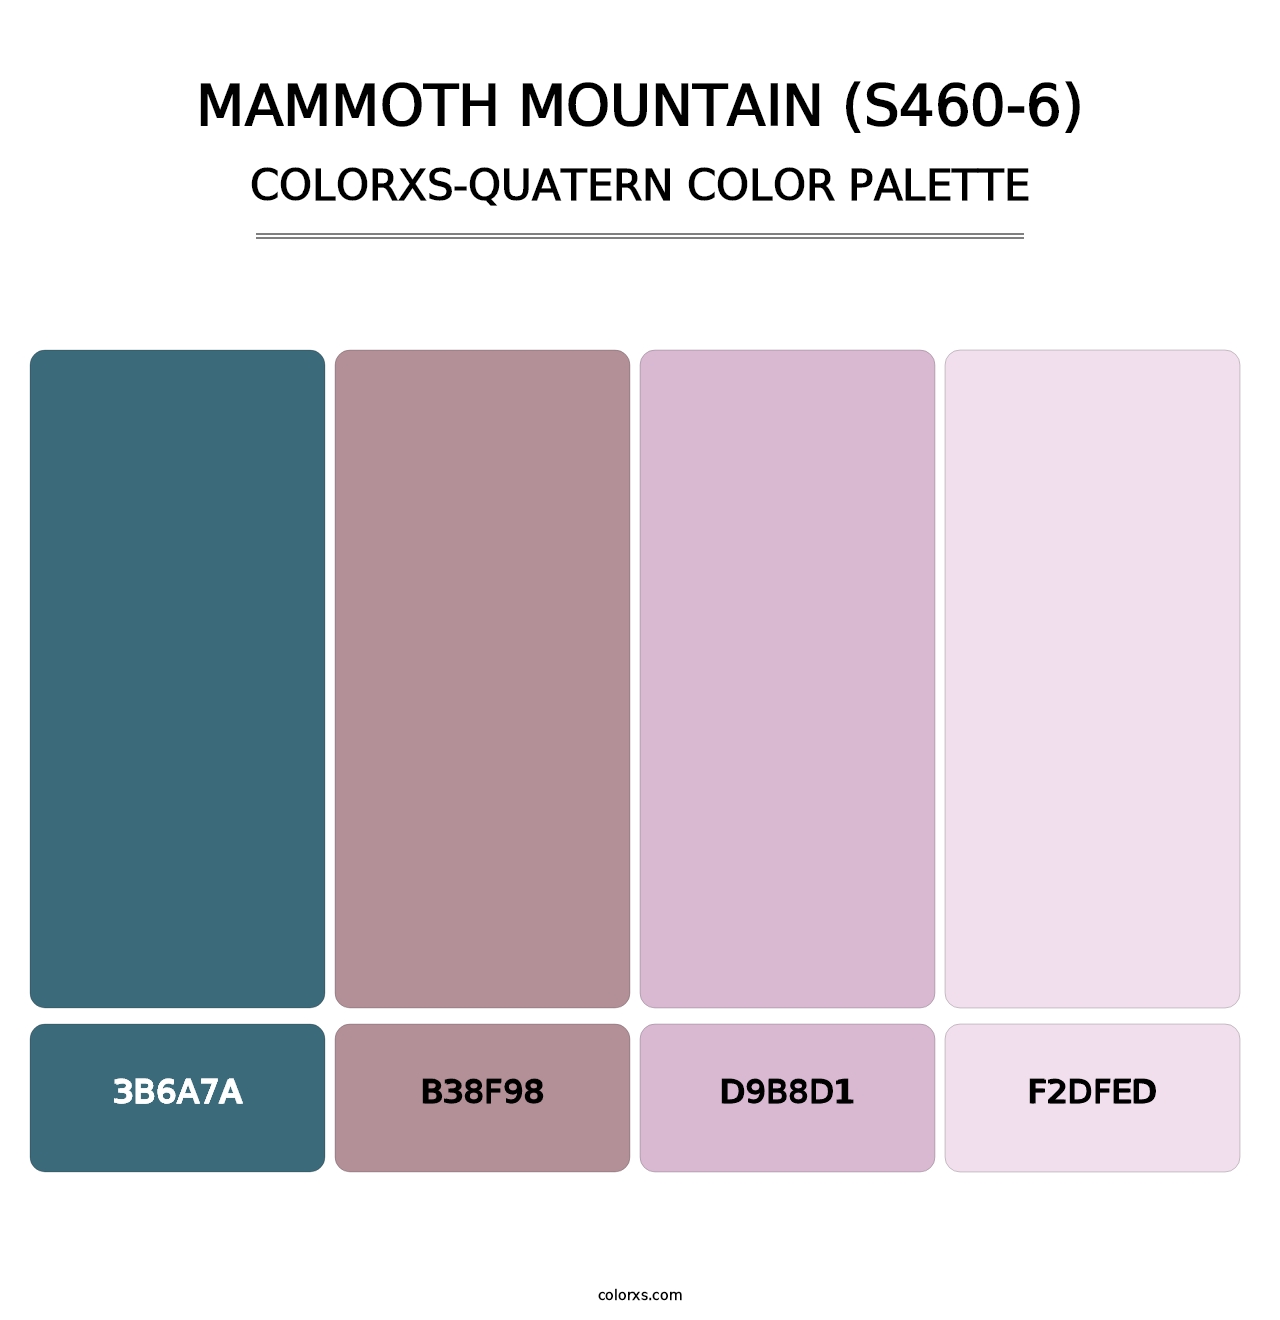 Mammoth Mountain (S460-6) - Colorxs Quatern Palette